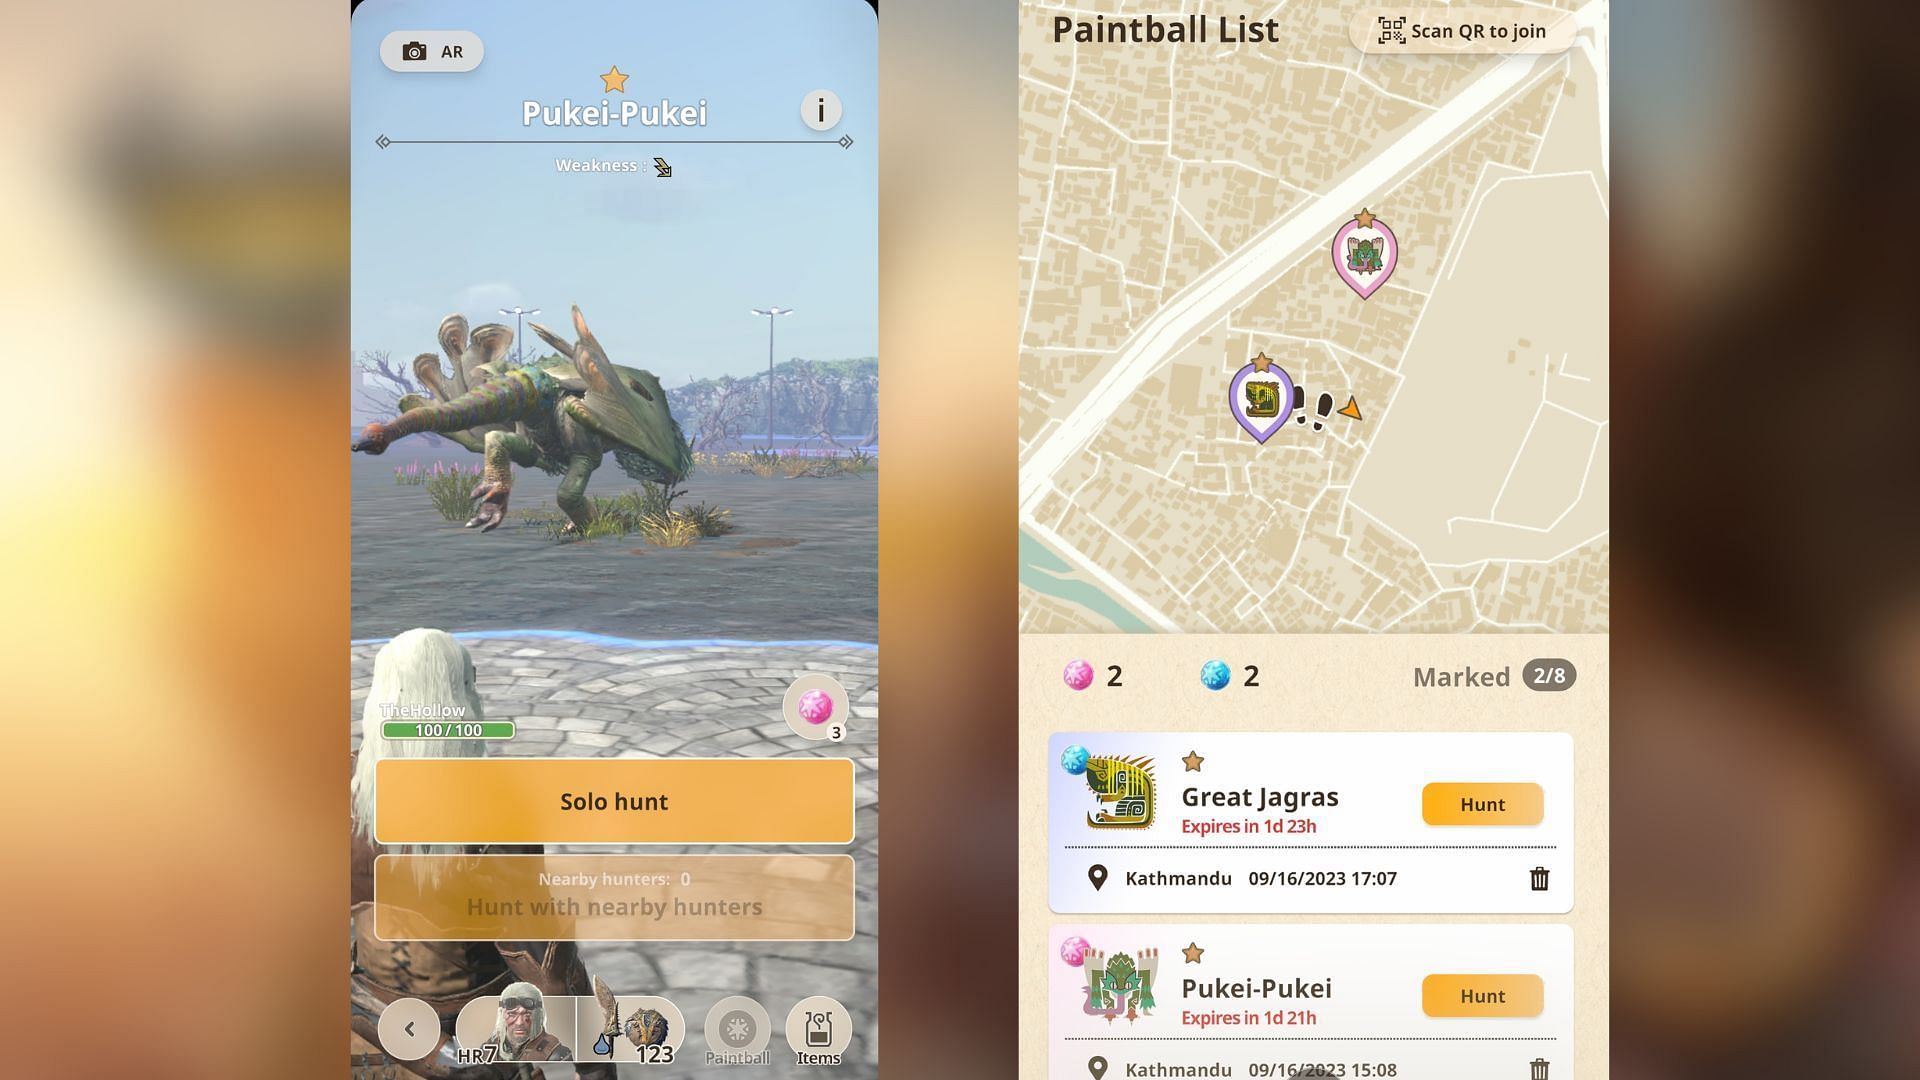 Mark monsters using Paintballs and hunt them later. (Image via Niantic)